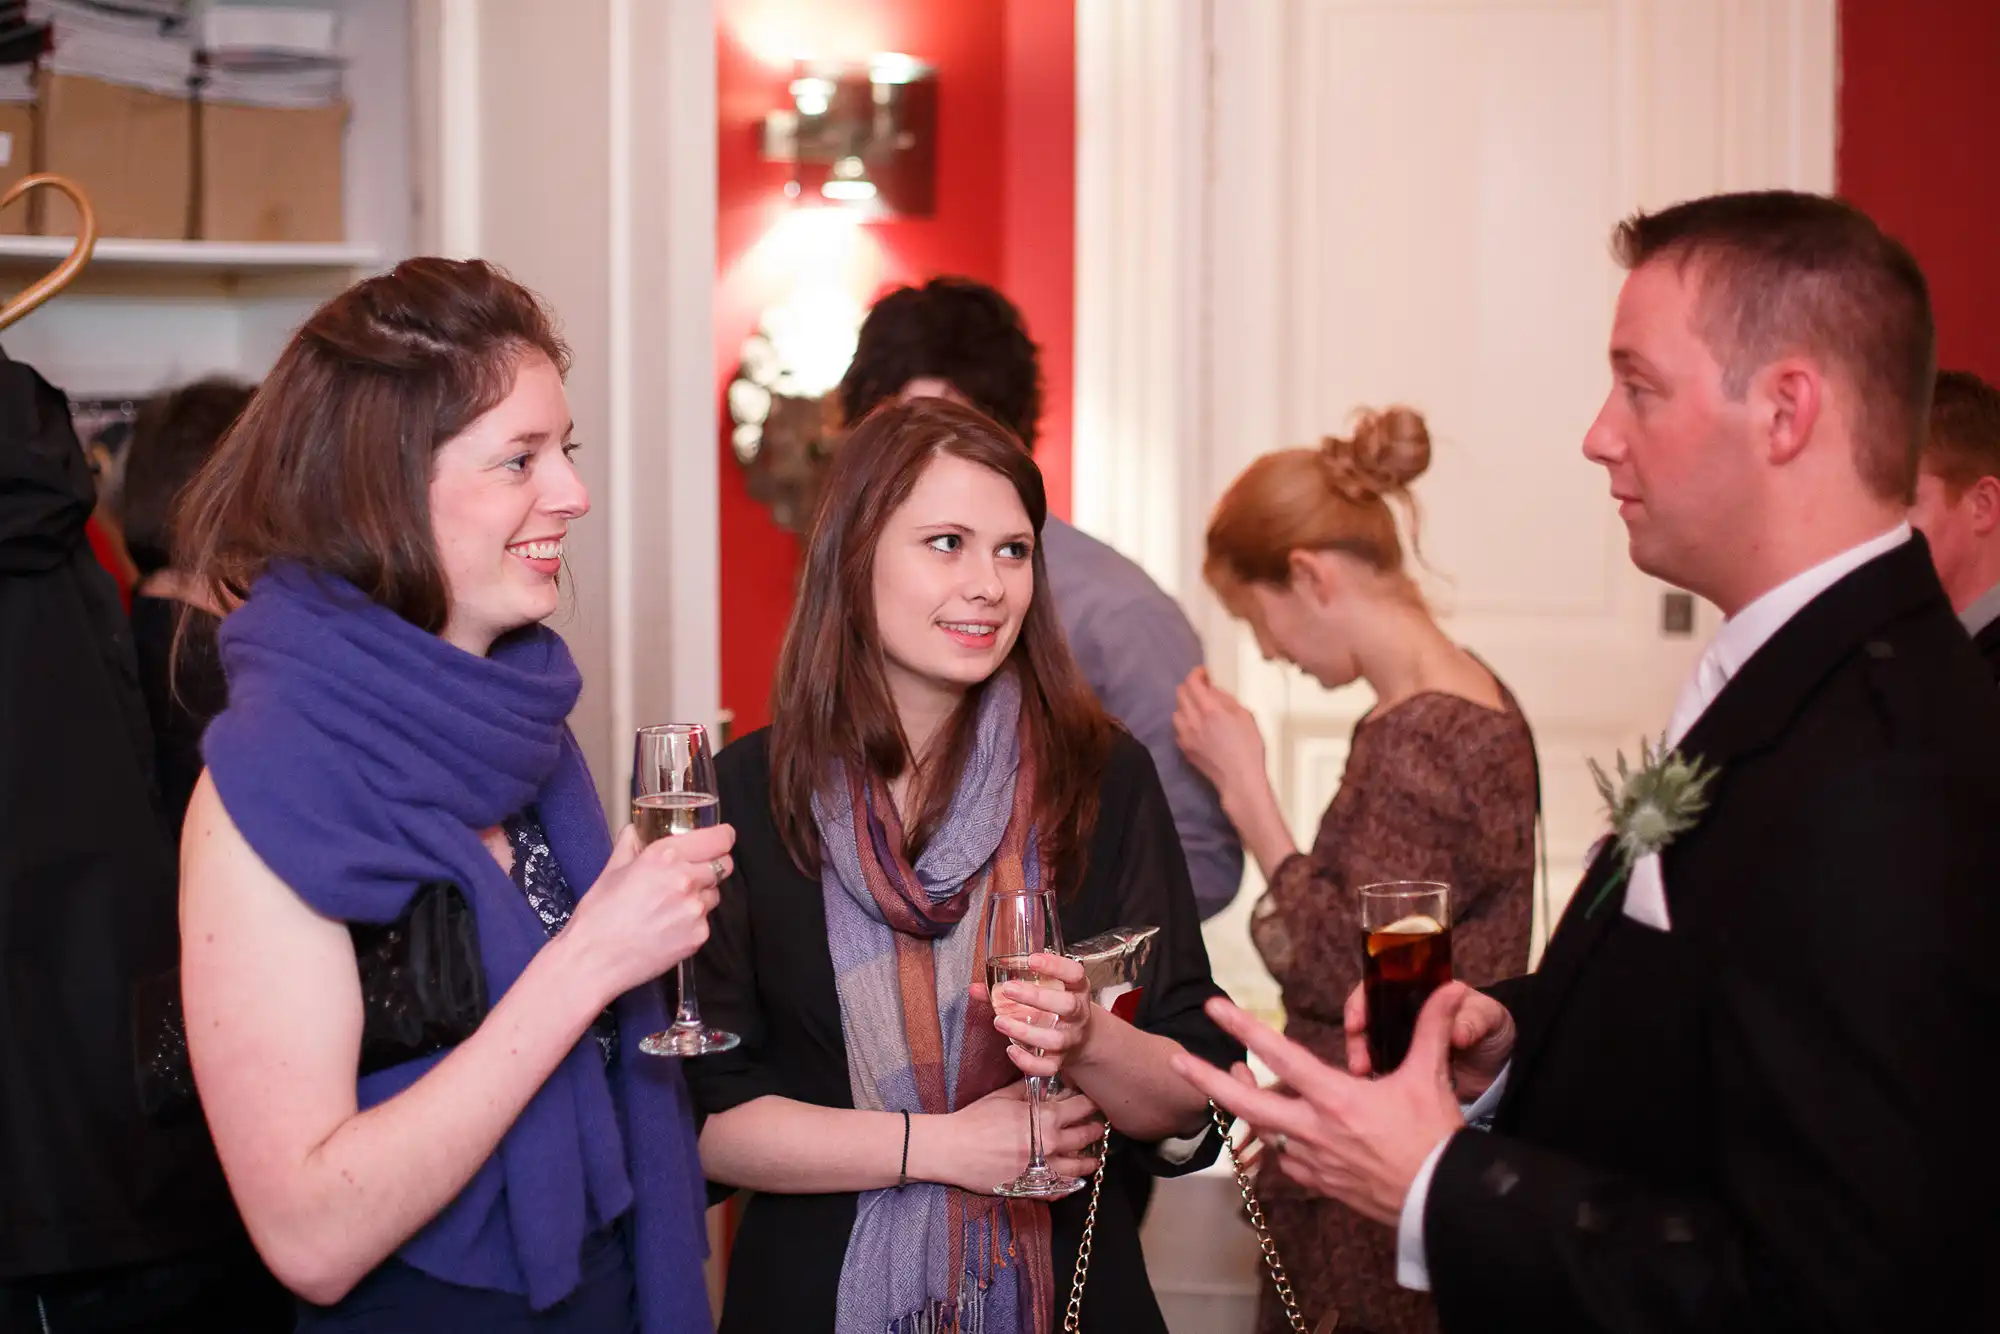 Three people engaging in a conversation at a social event, two women and a man, holding glasses of champagne.